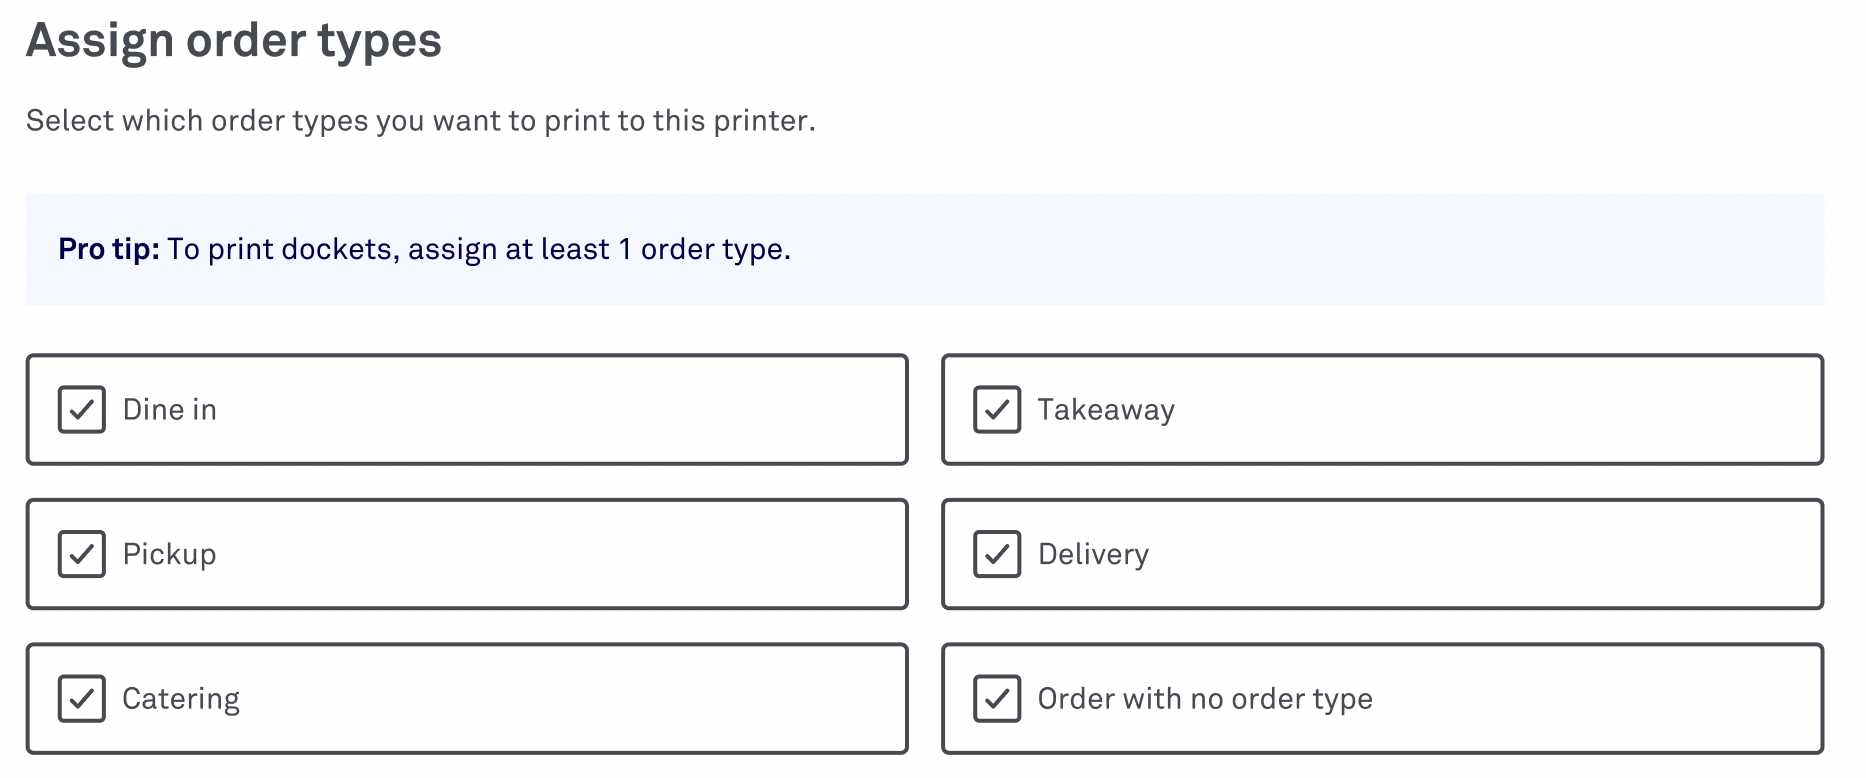 Assign_order_types_to_printer.png